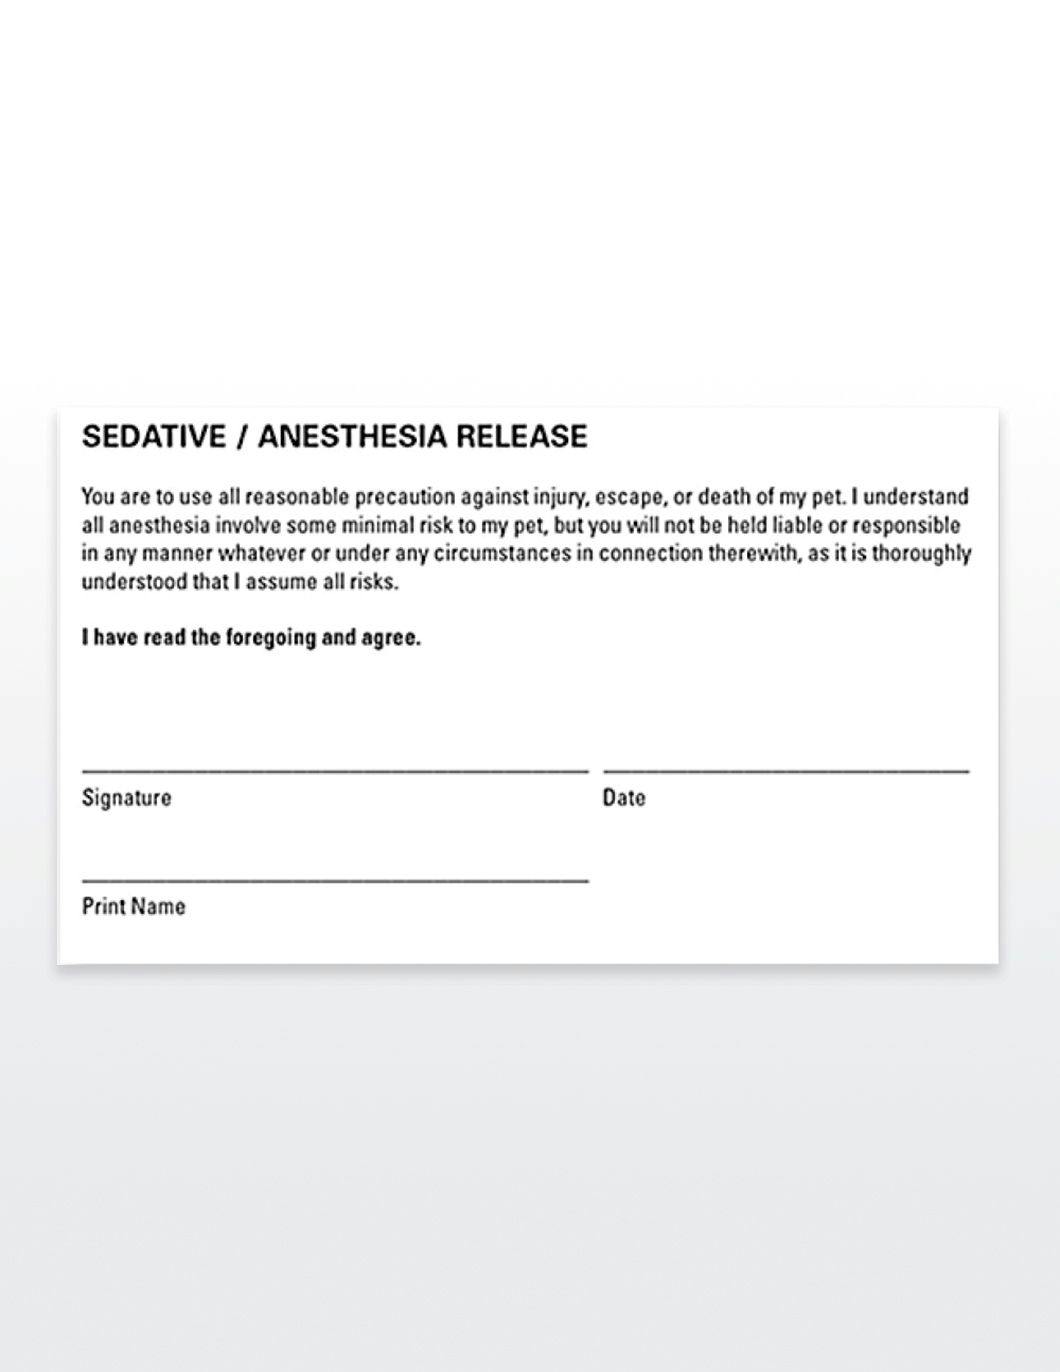 medical-record-labels-sedative-anesthesia-release 